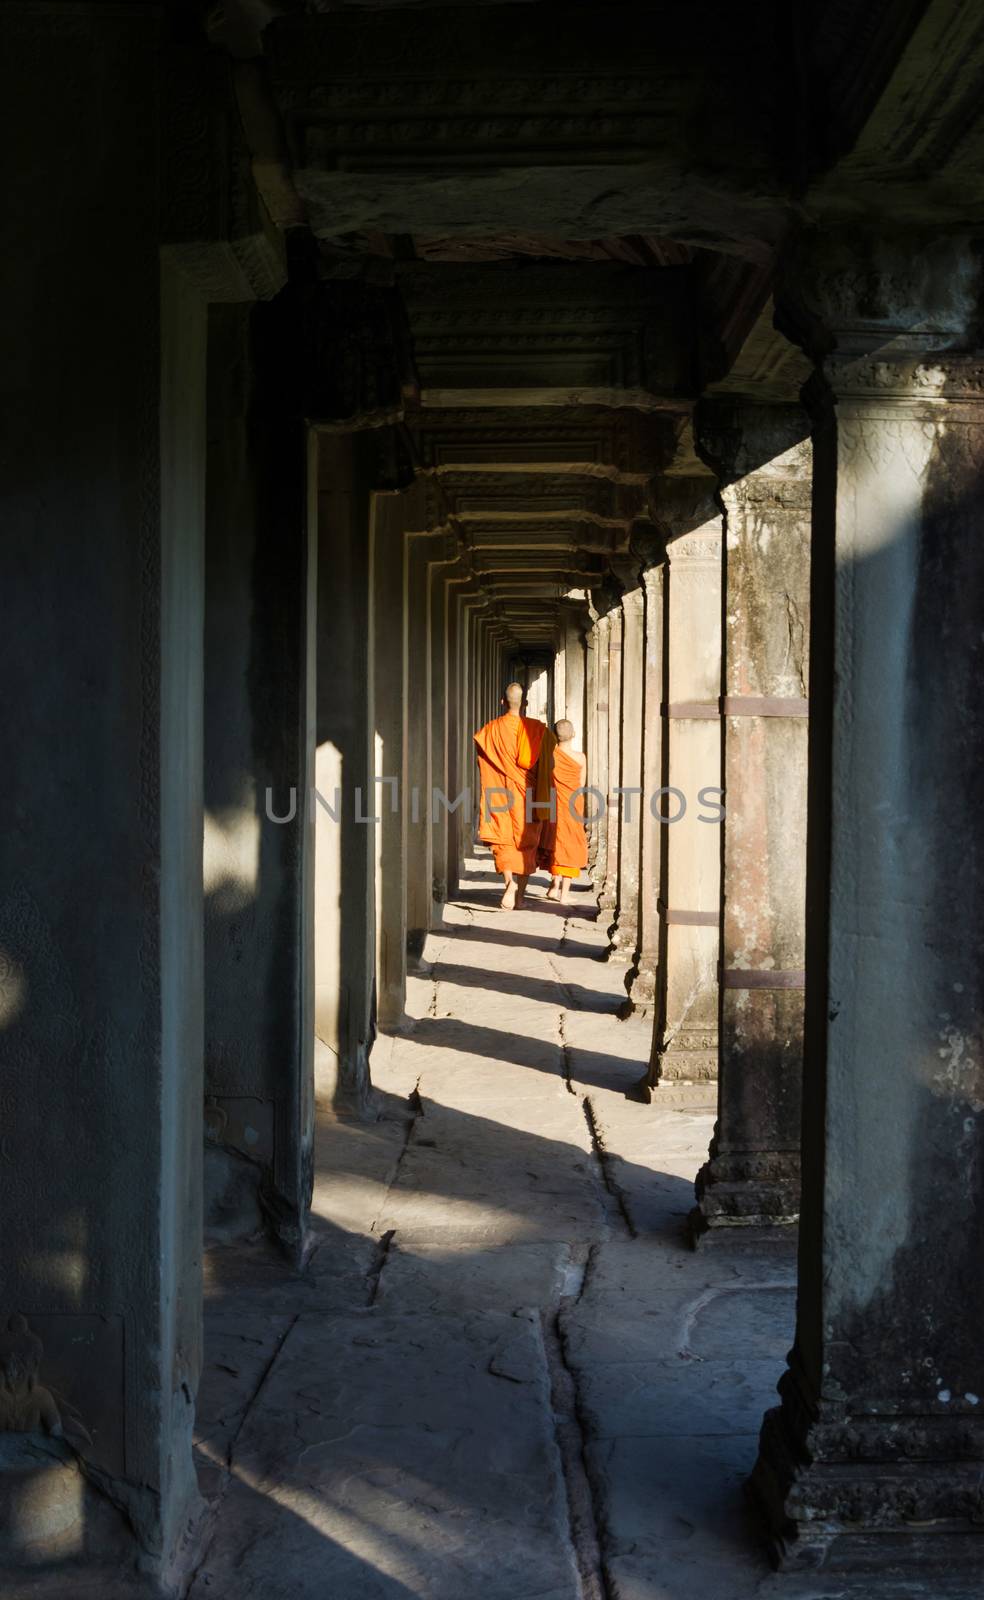 Monks walking along the longest gallery of Angkor Wat temple by siraanamwong